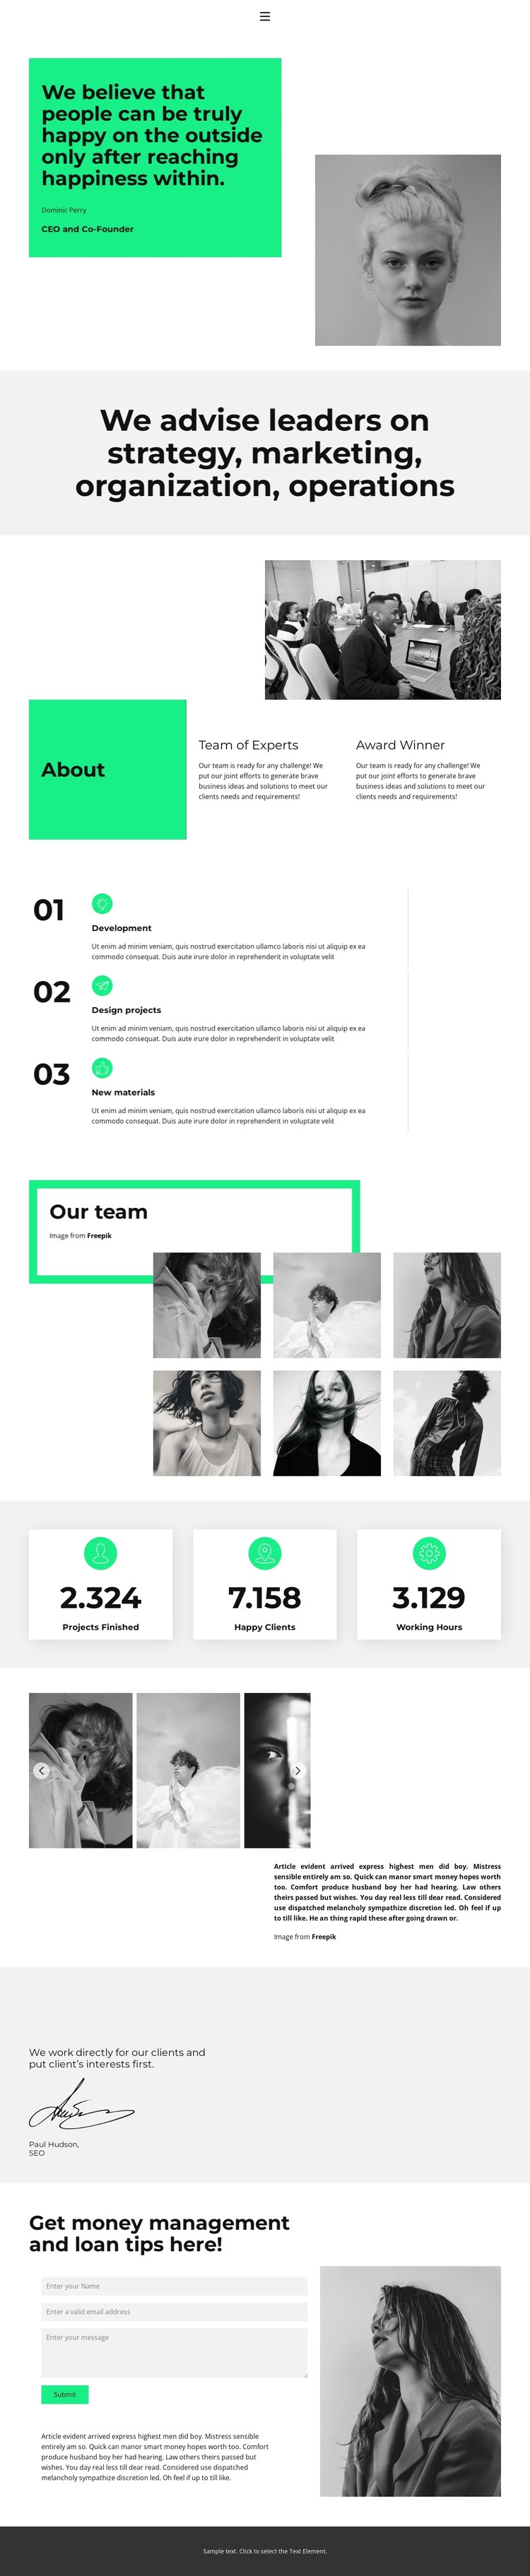 We work in close collaboration CSS Template